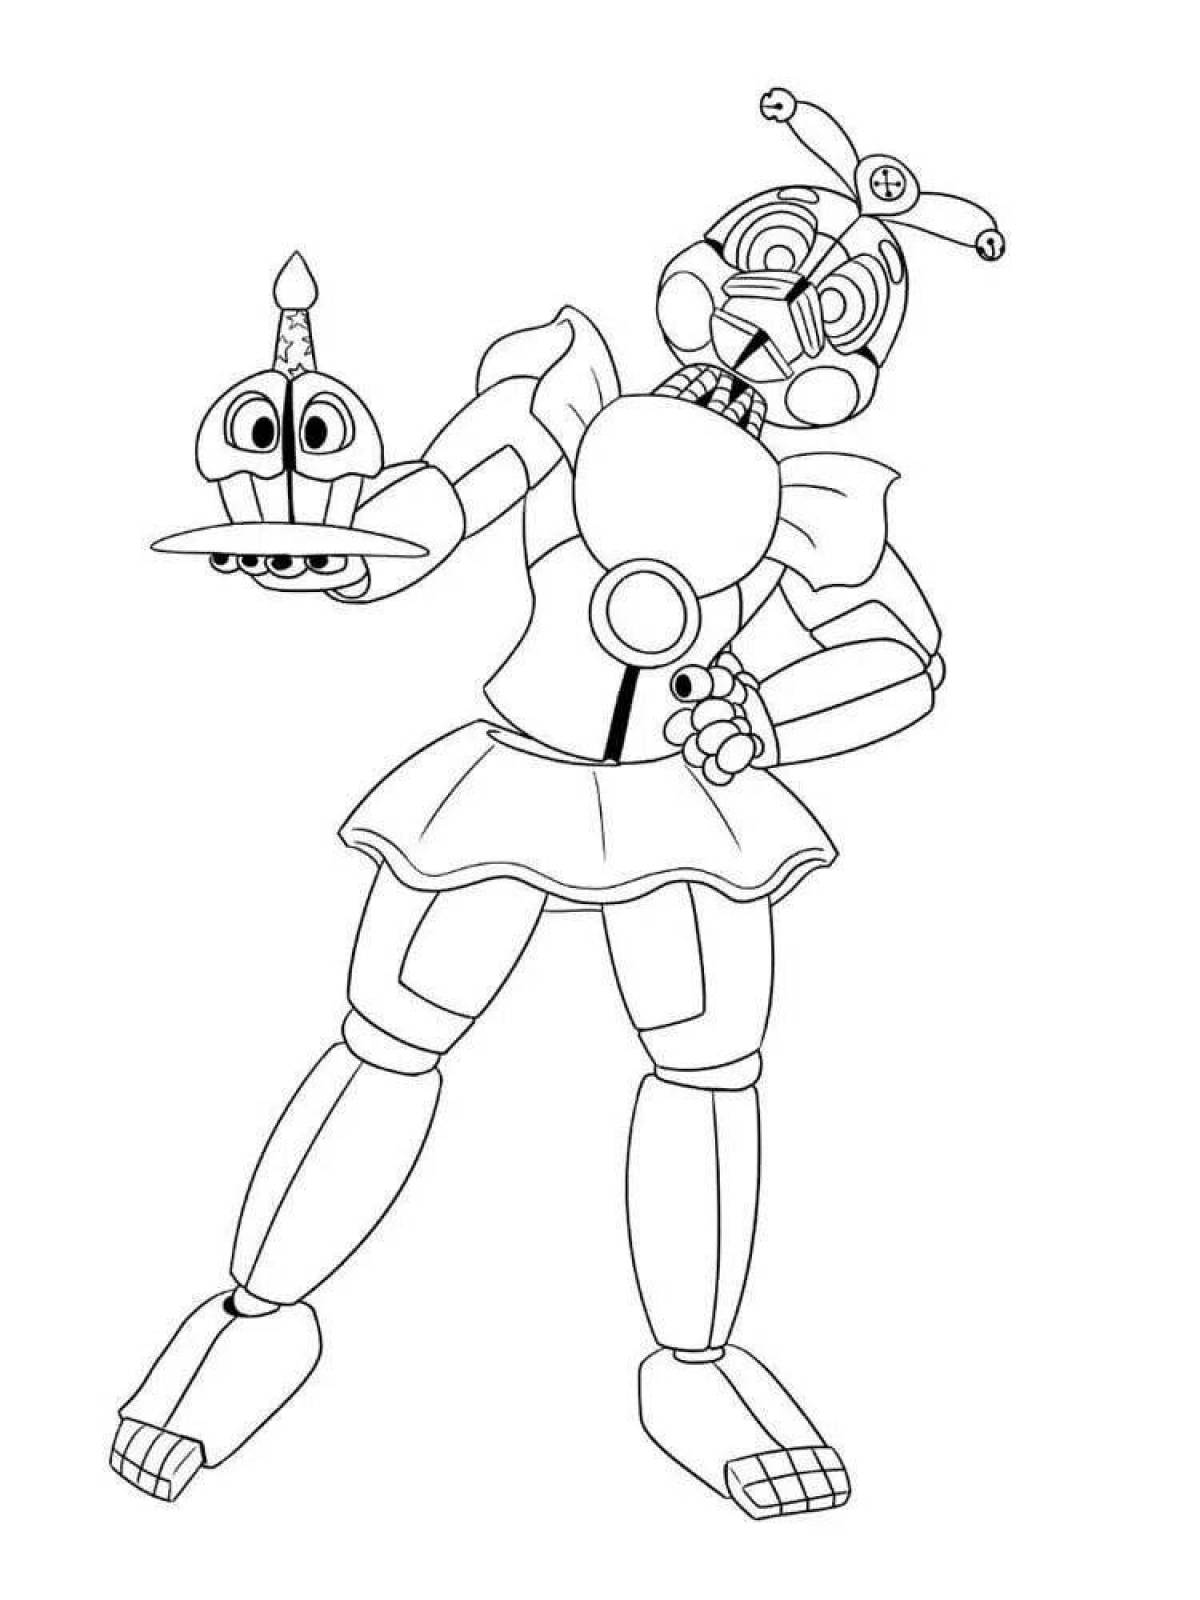 Coloring funny toy chica